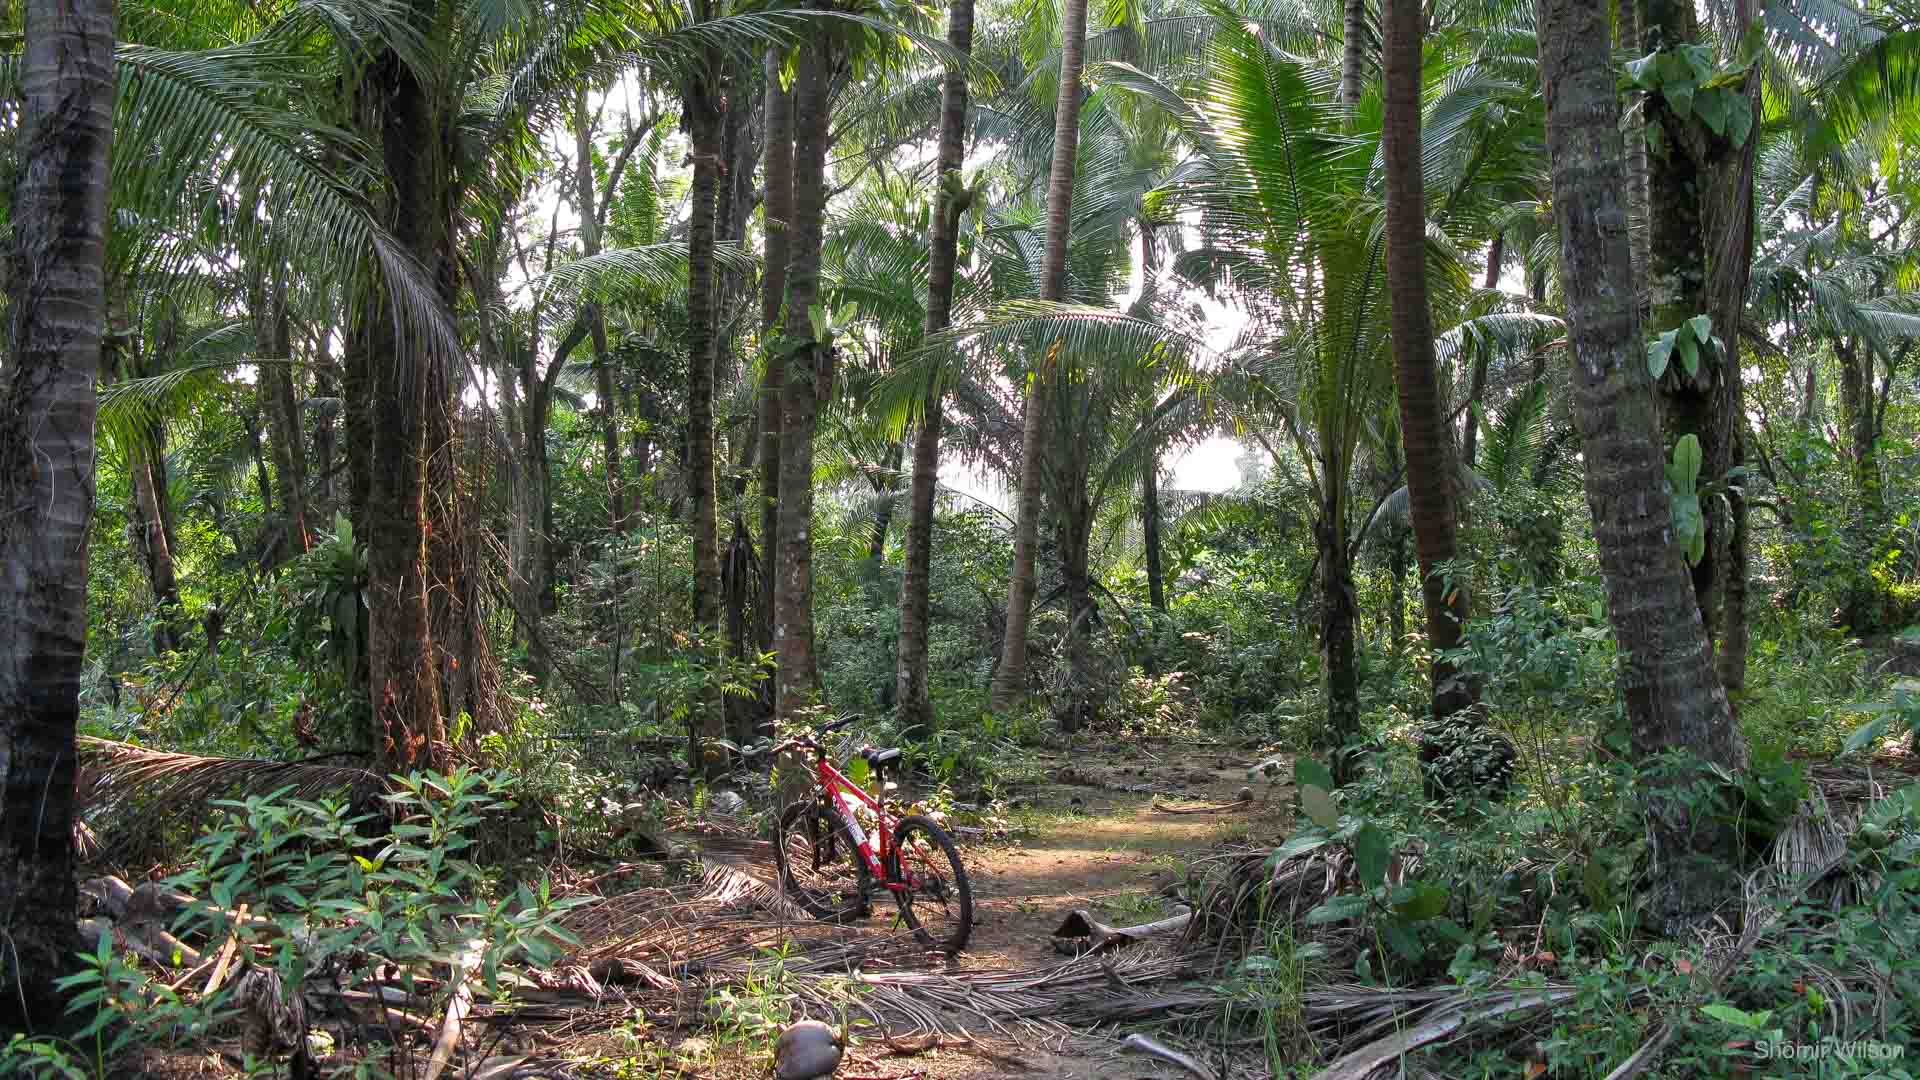 A red bicycle in a palm forest